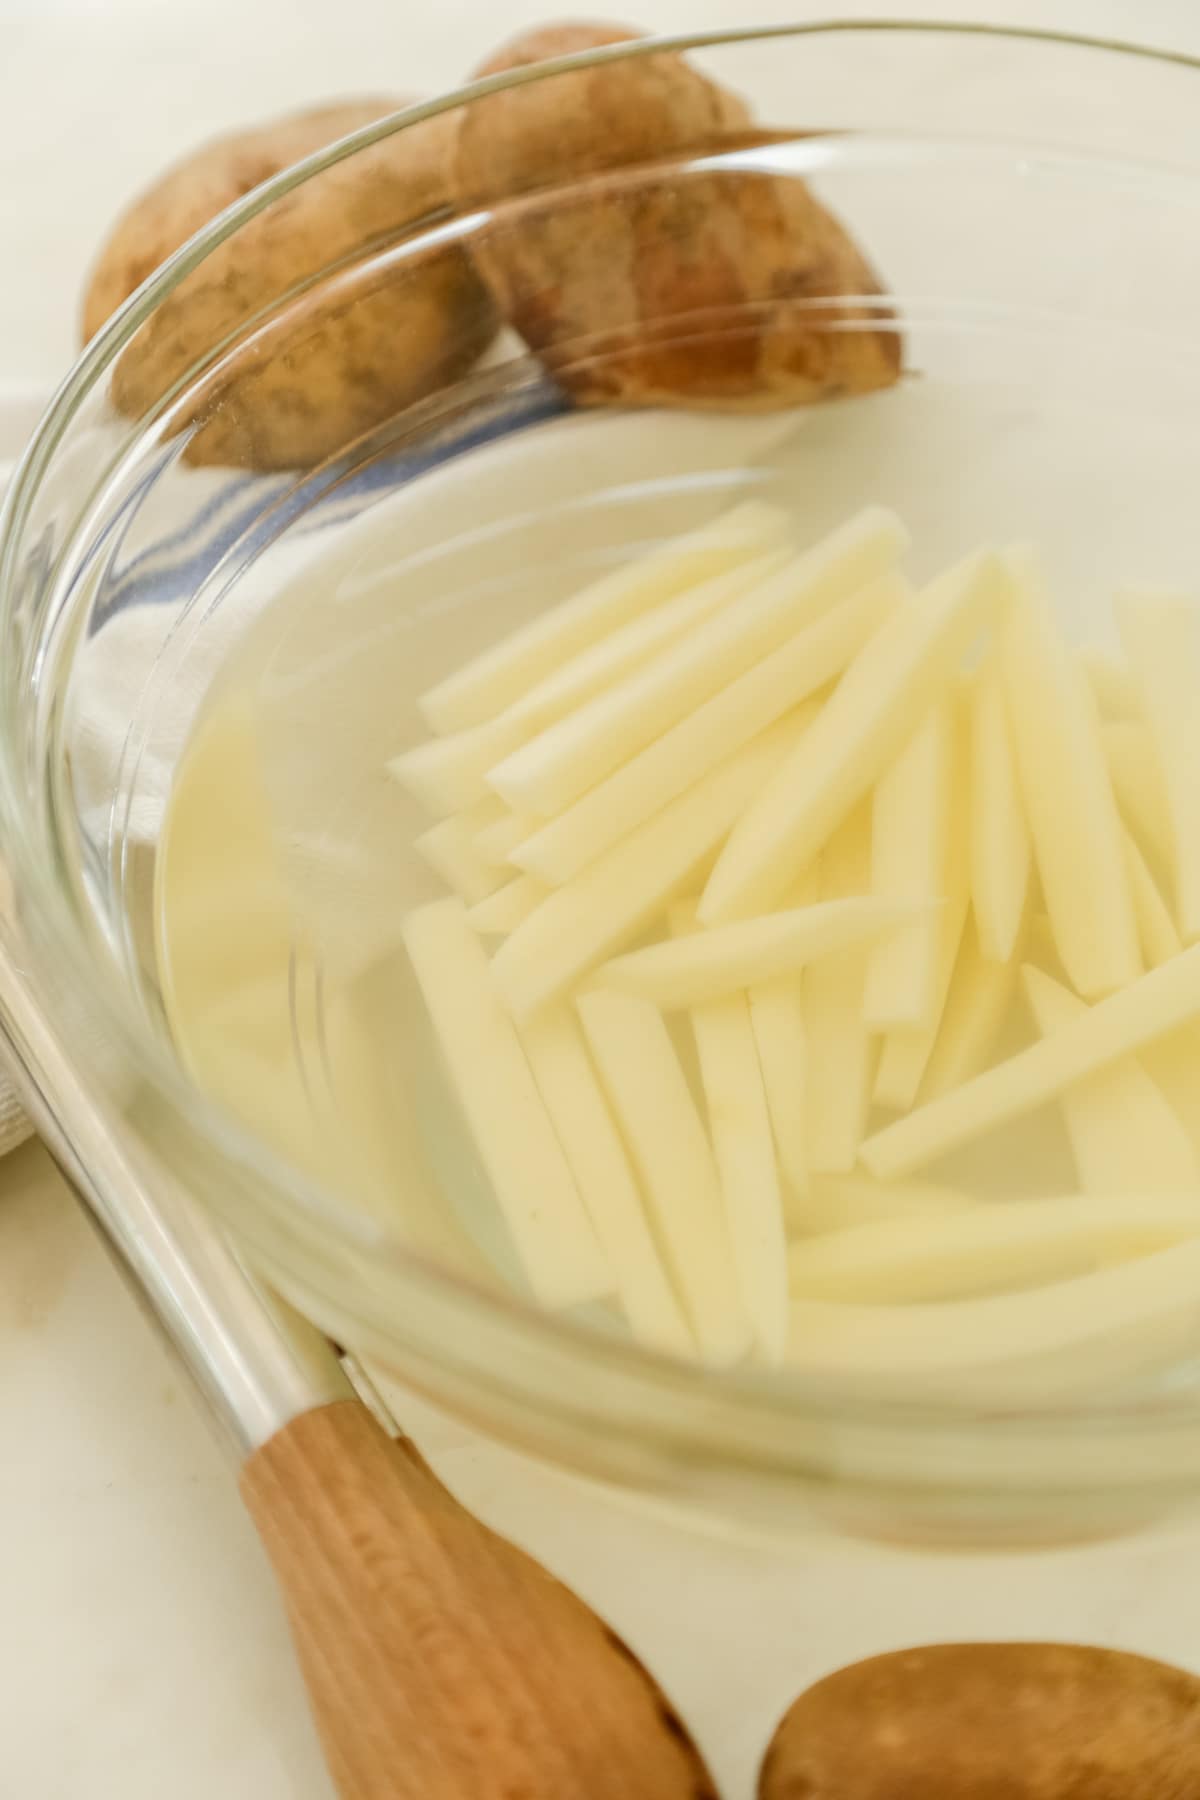 Uncooked French fries soaking in a bowl of water.